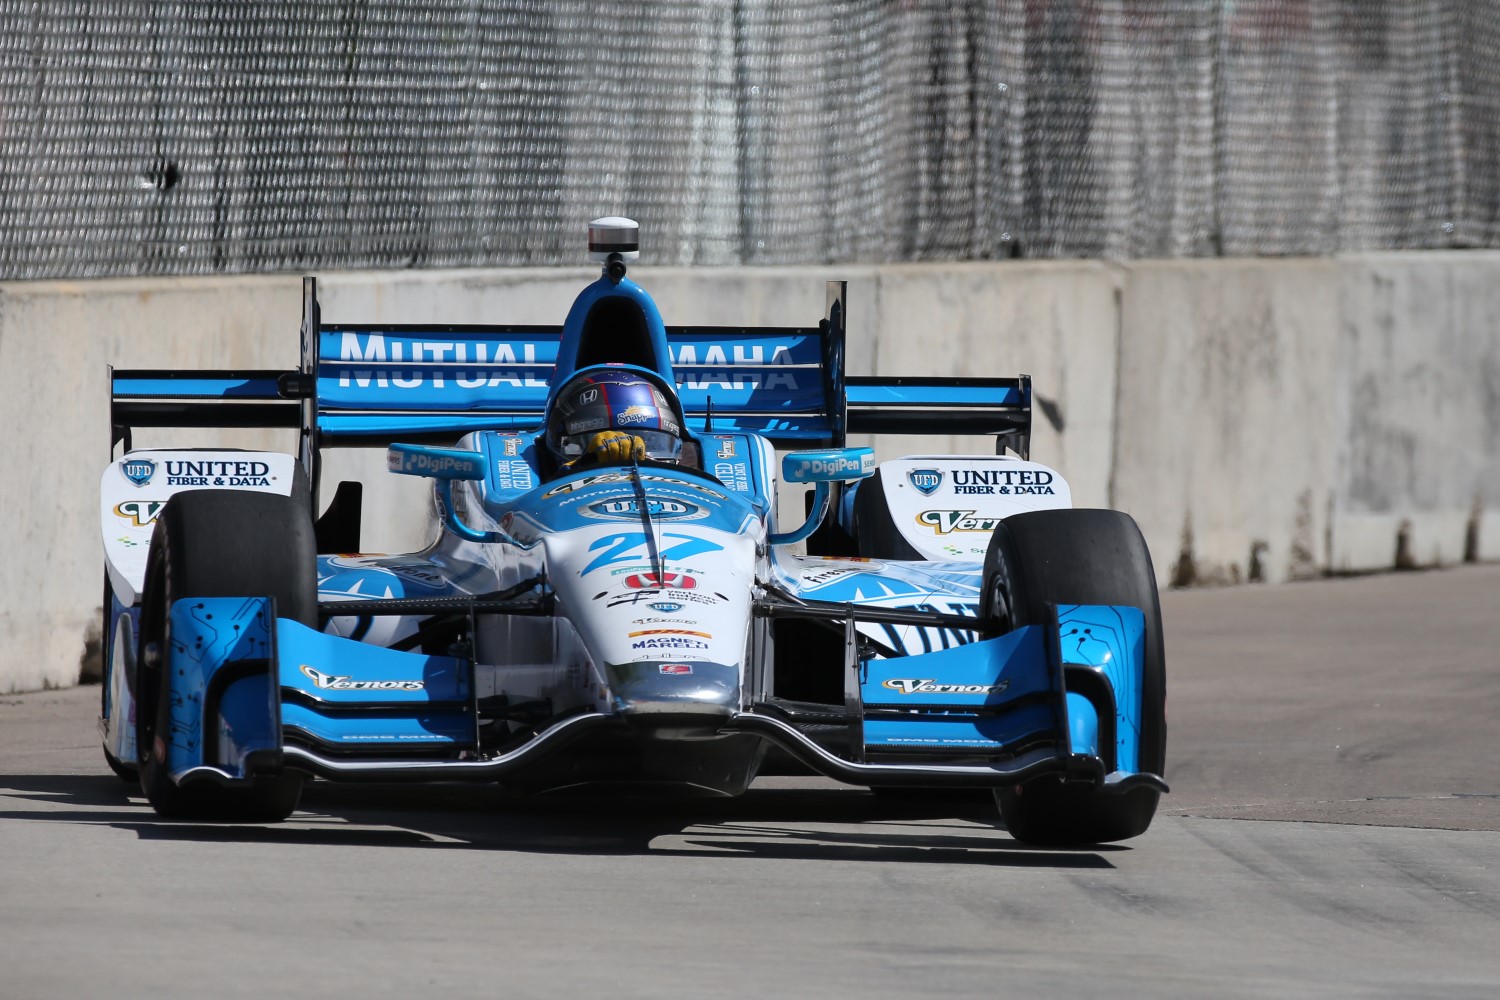 Marco Andretti continues to struggle in qualifying